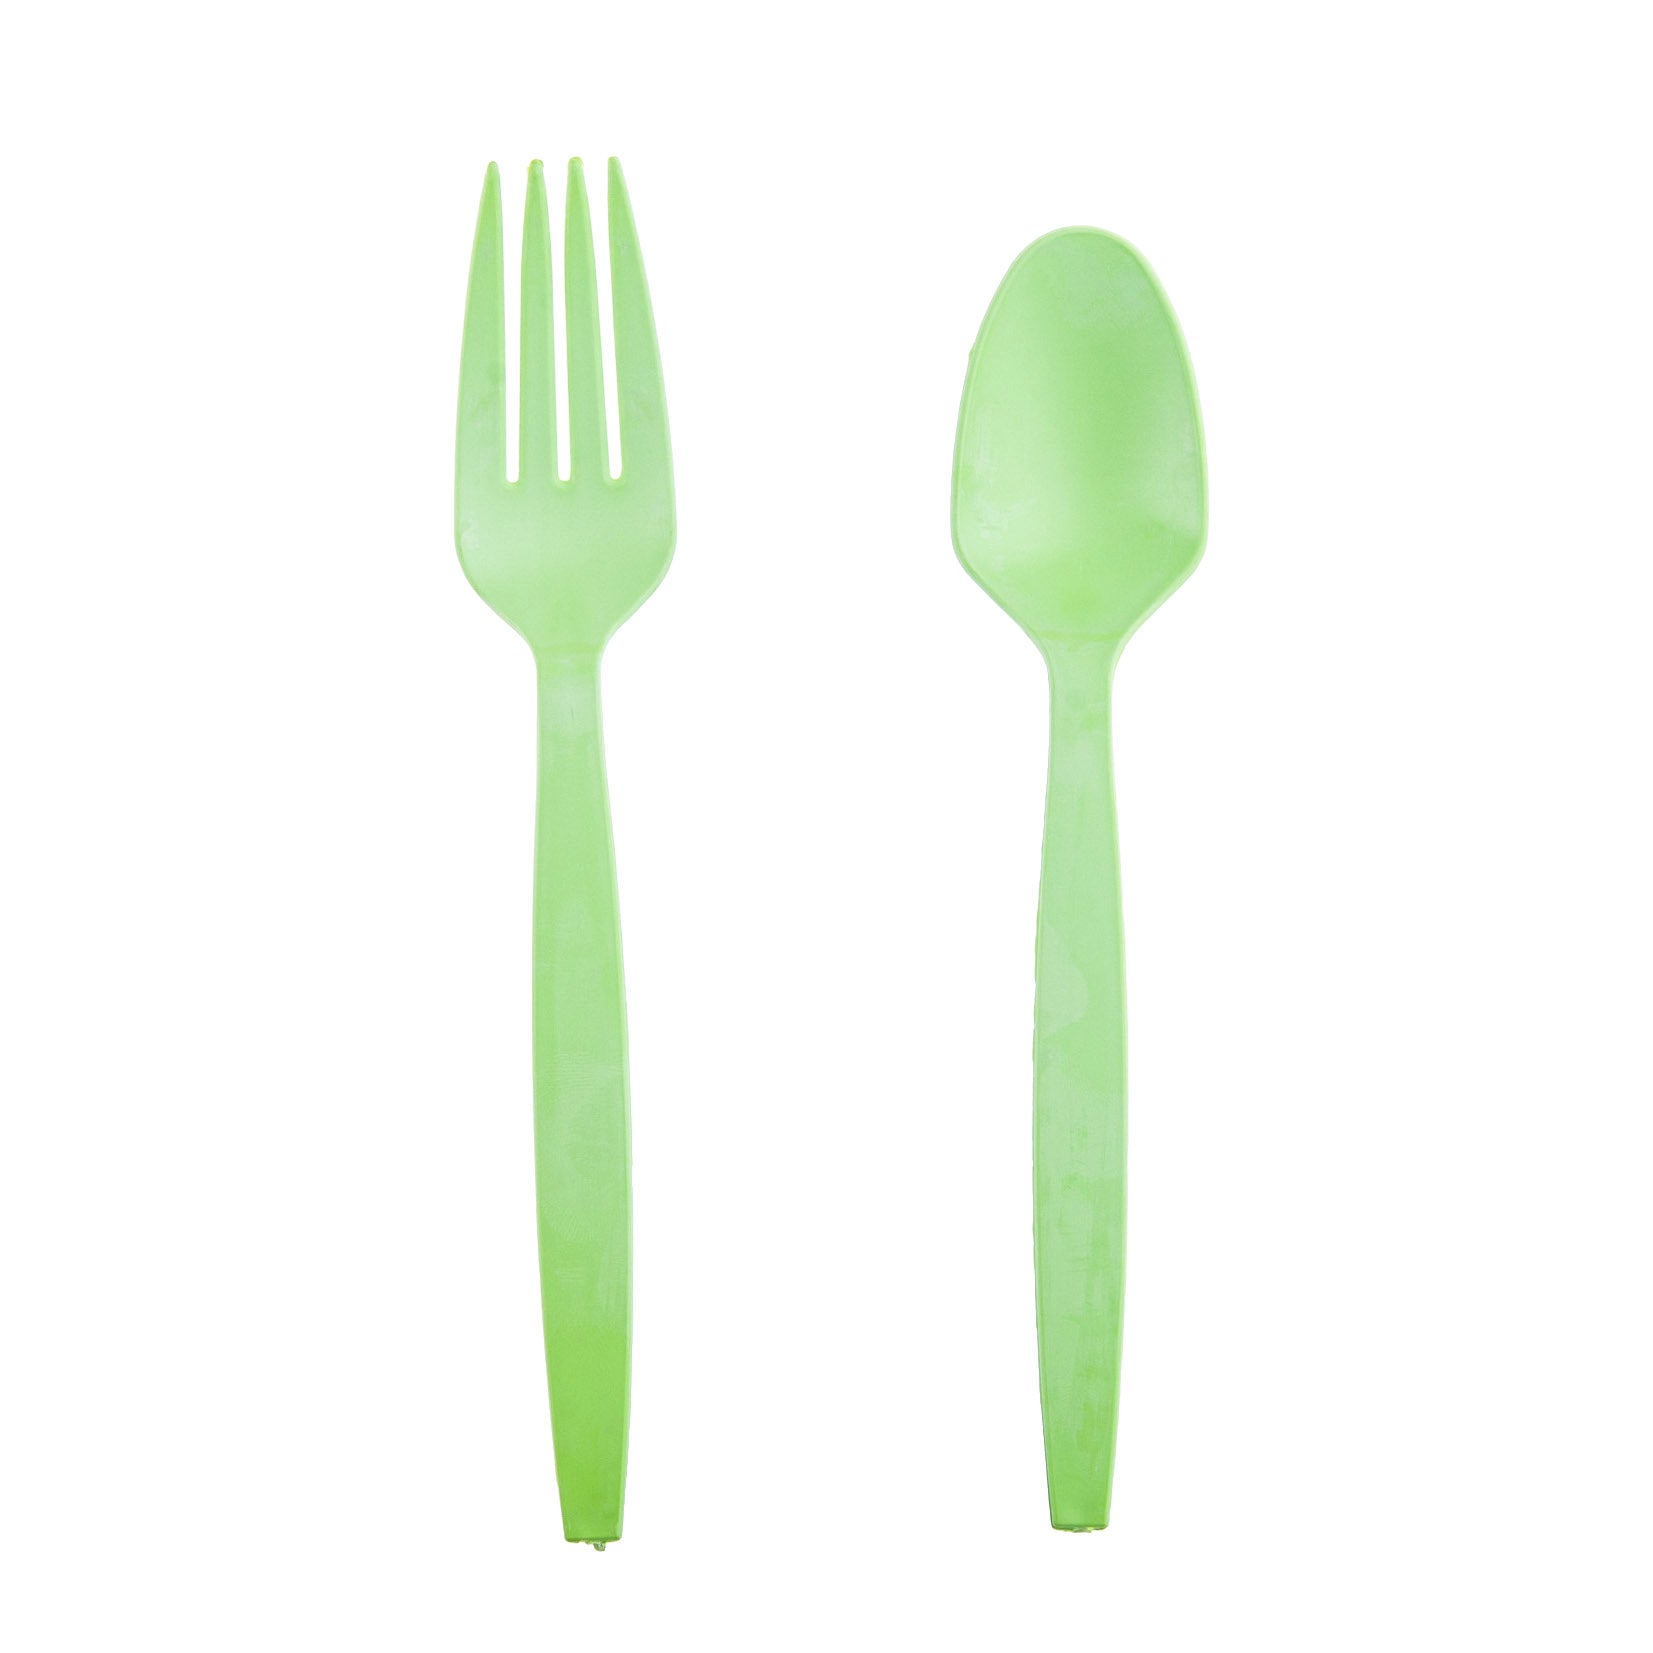 Cheers Starch-Based Cutleries Spoon & Fork 12 Pairs - Green Color (1 Pack) TPH